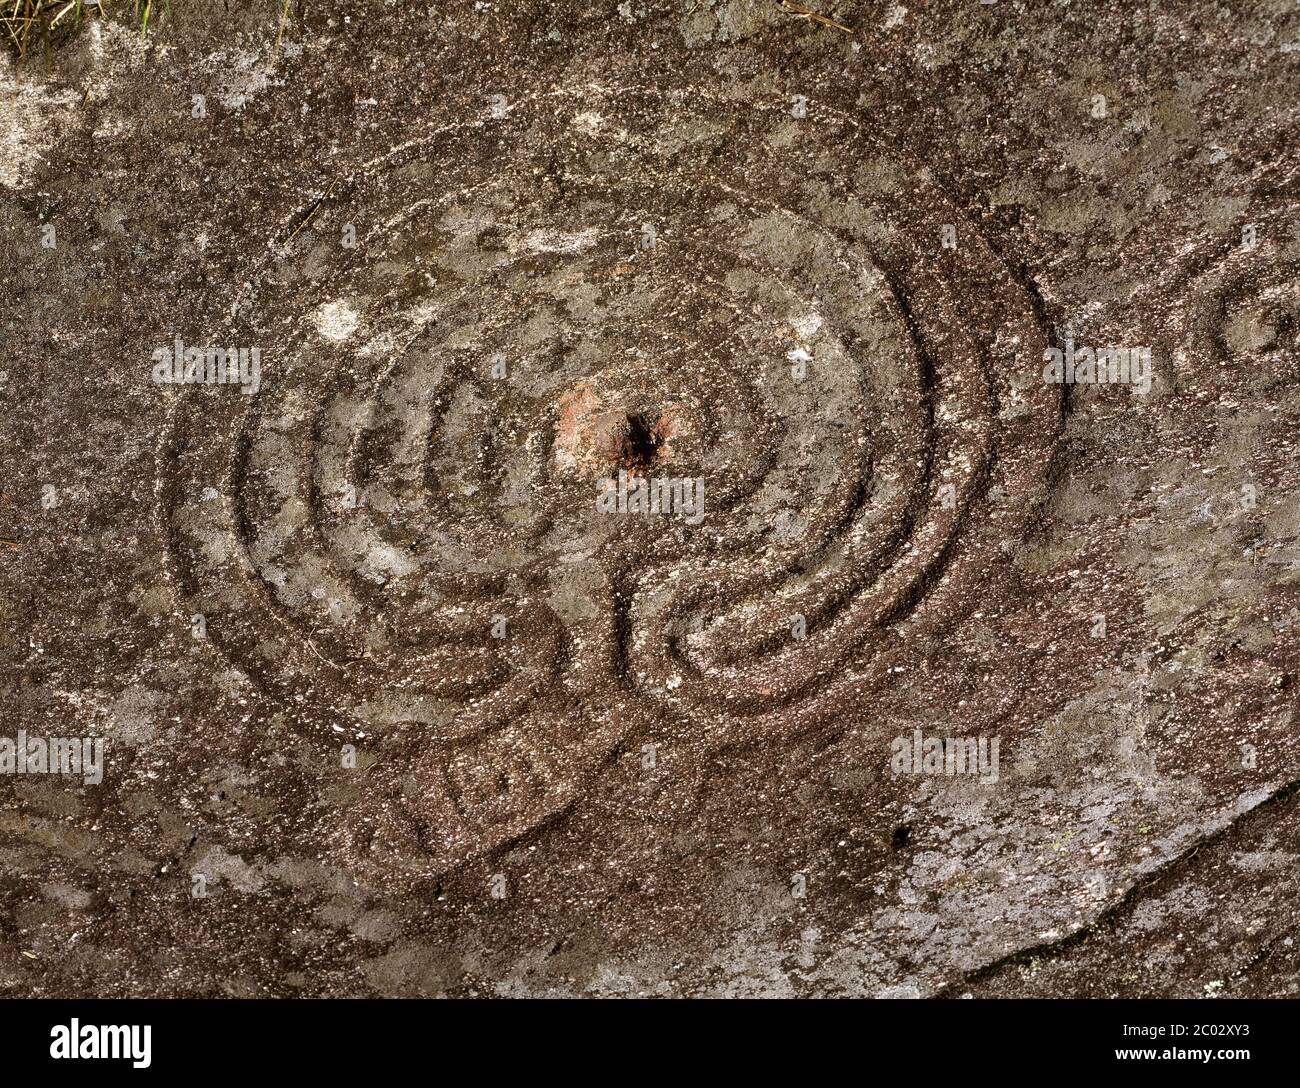 Petroglyphs of Mogor carving on the rock. Detail of the 'Labyrinth of Mogor', one of the three petroglyphs that remain visible in Mogor. Metal Ages. c. 3.000-2000 BC. Municipality of Marin, Pontevedra province. Galicia, Spain. Stock Photo